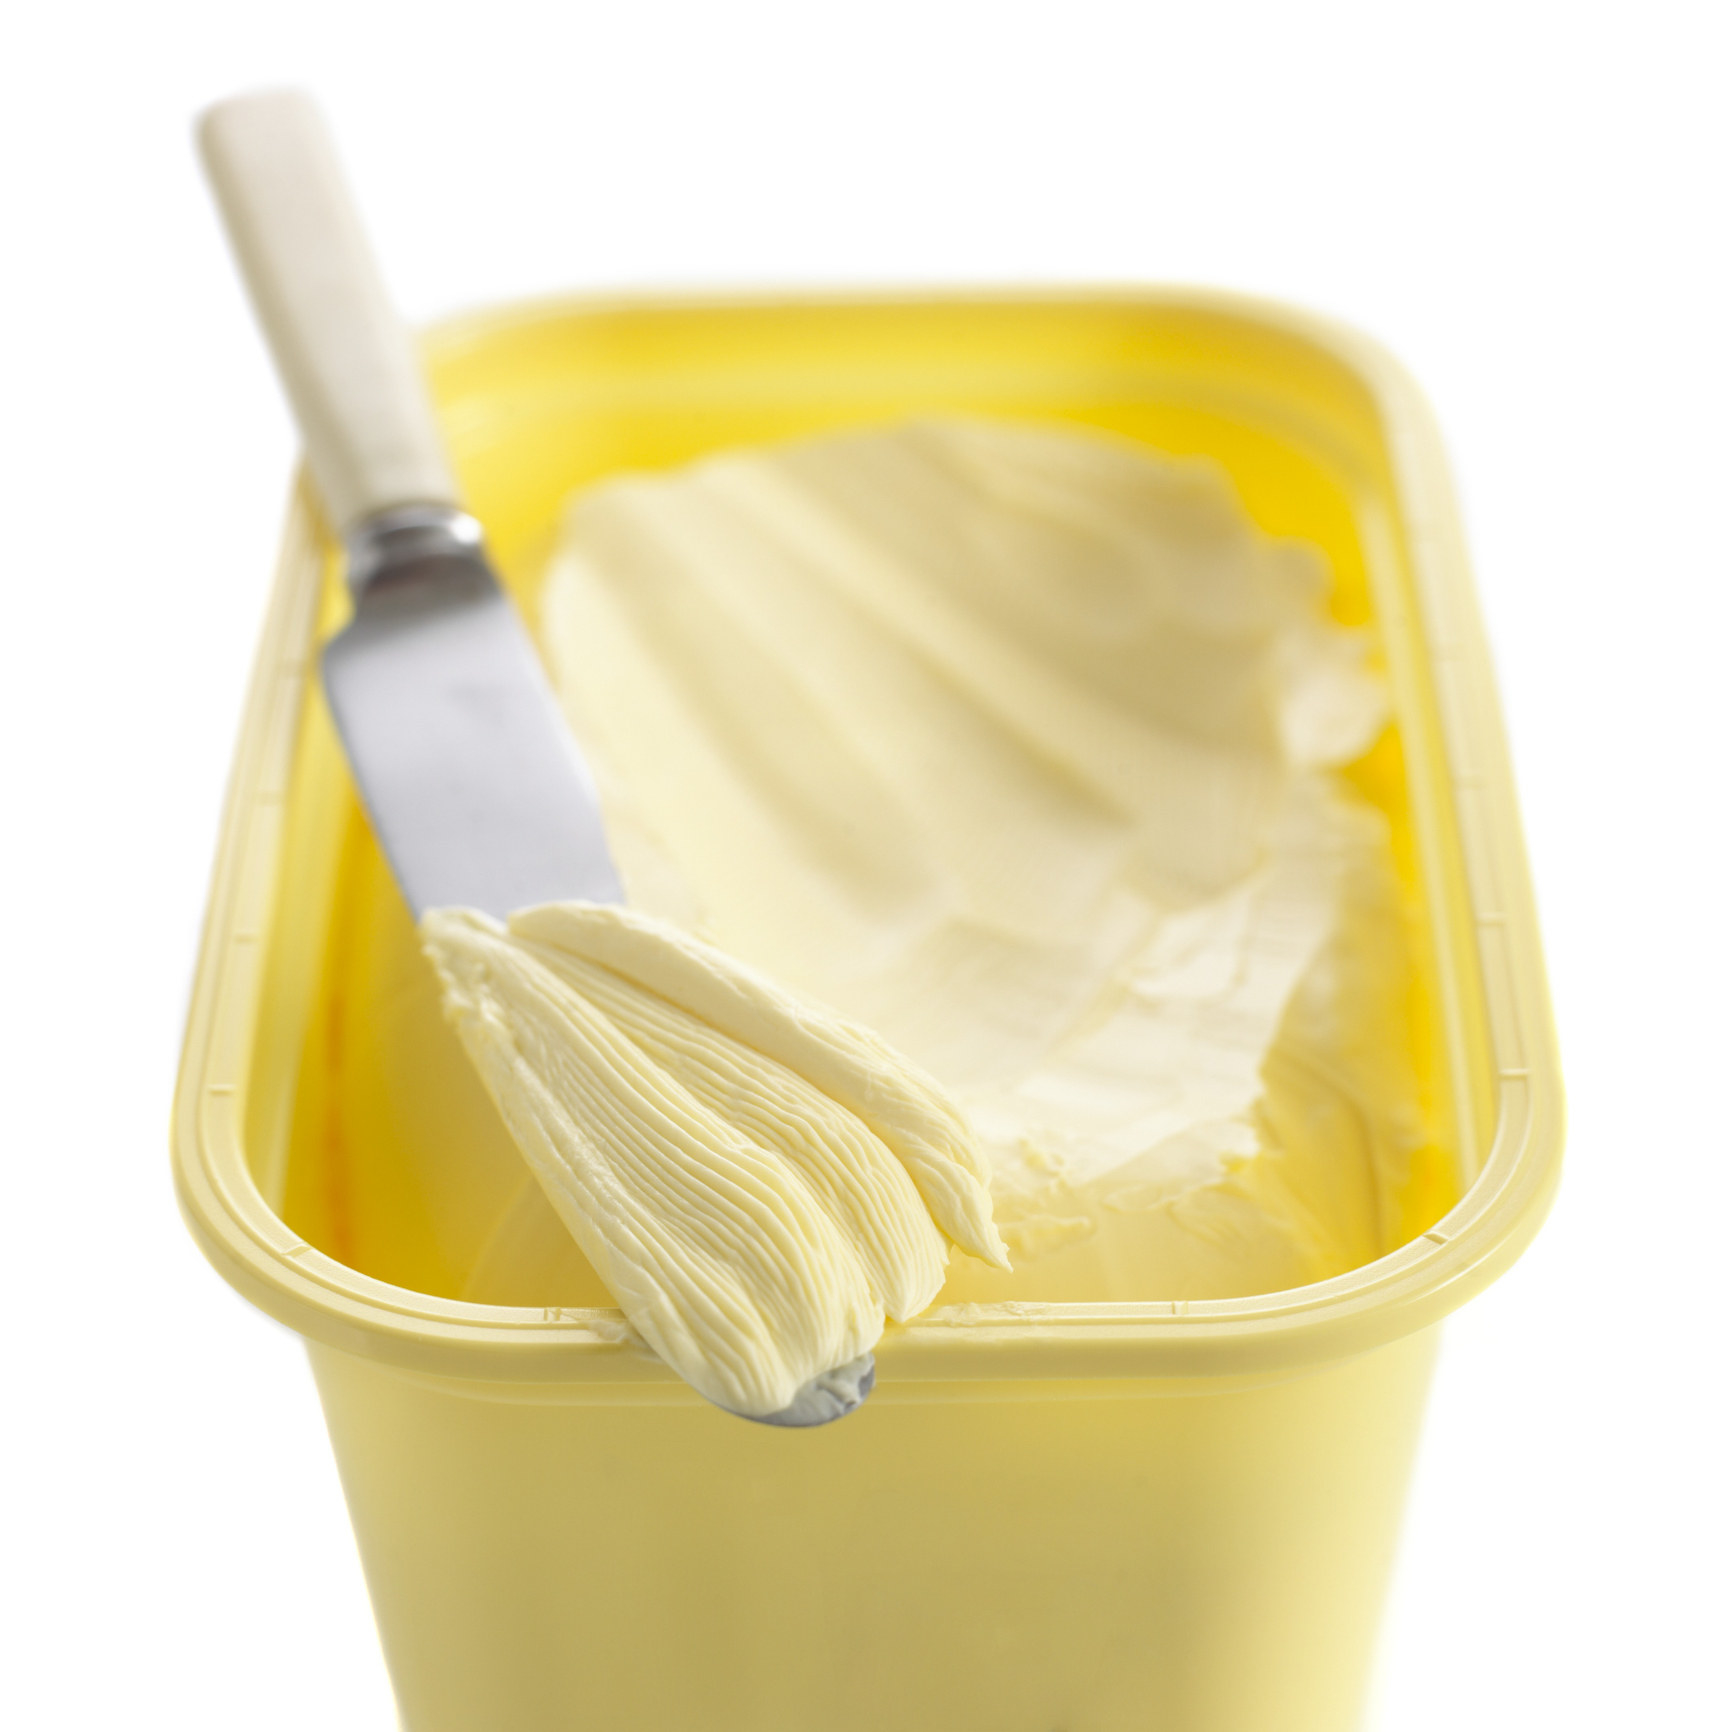 A butter knife with a smear of margarine on it sitting atop a rectangular tub of margarine